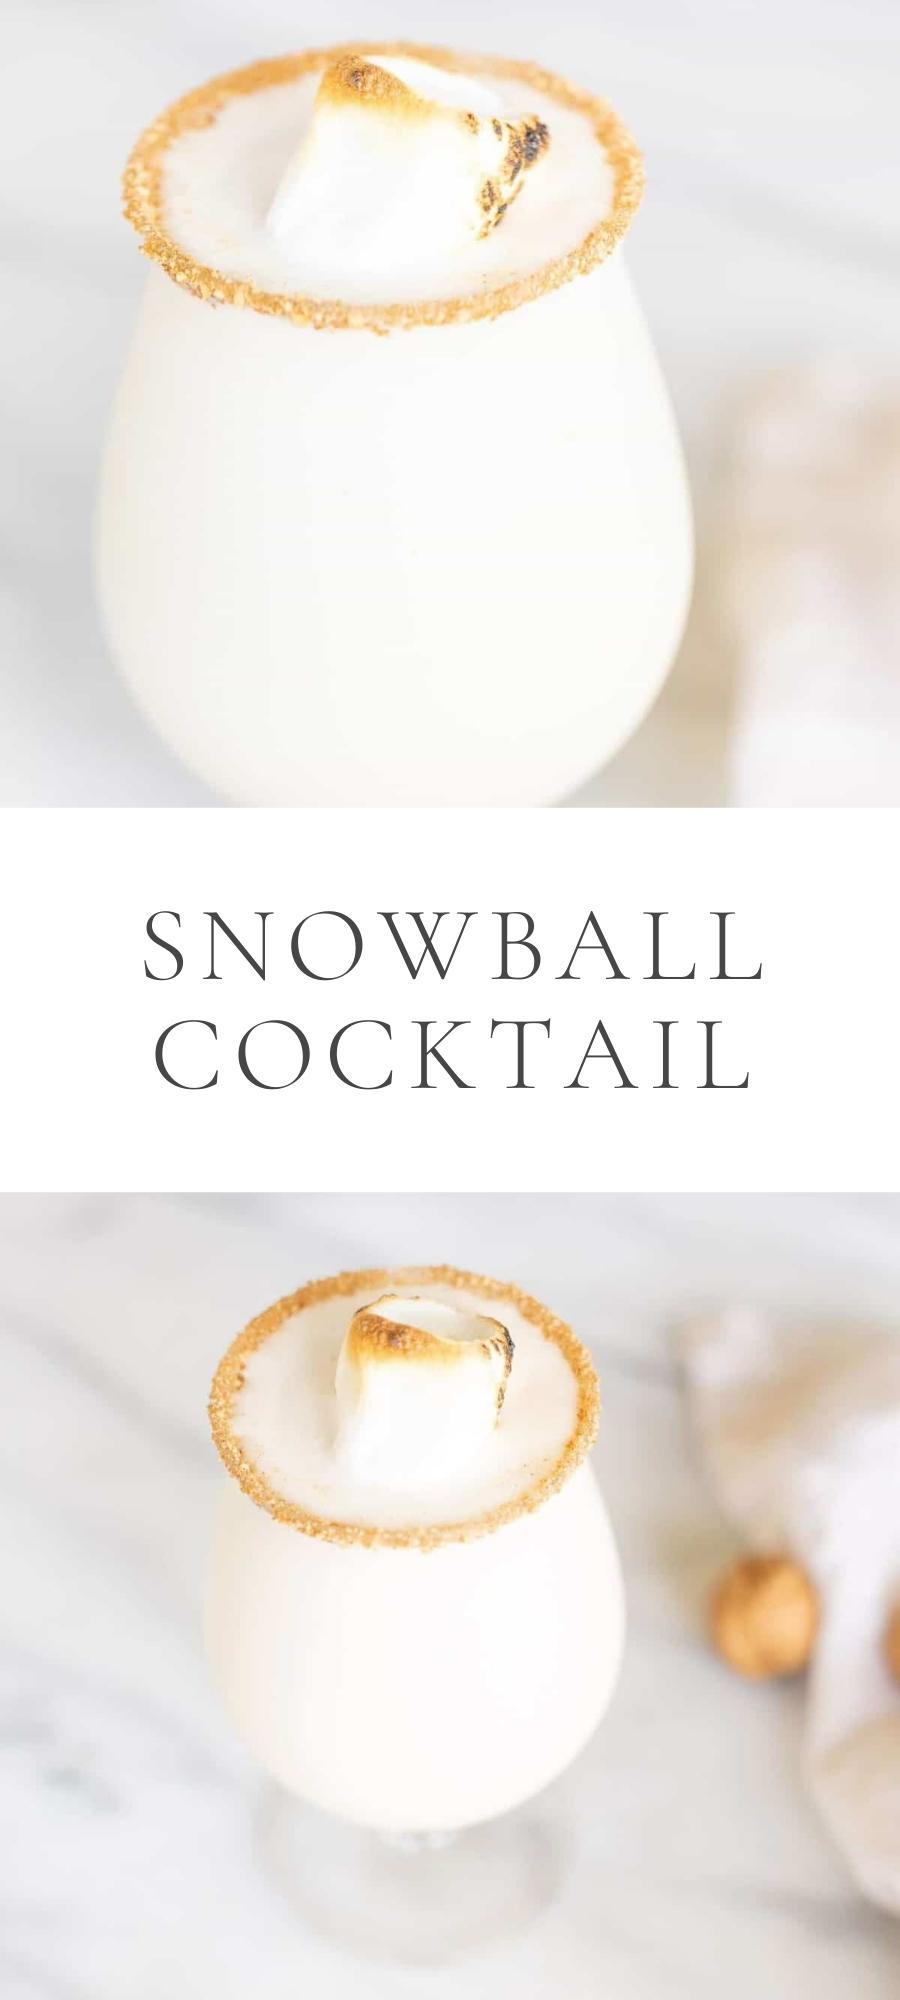 snowball cocktail in clear glass